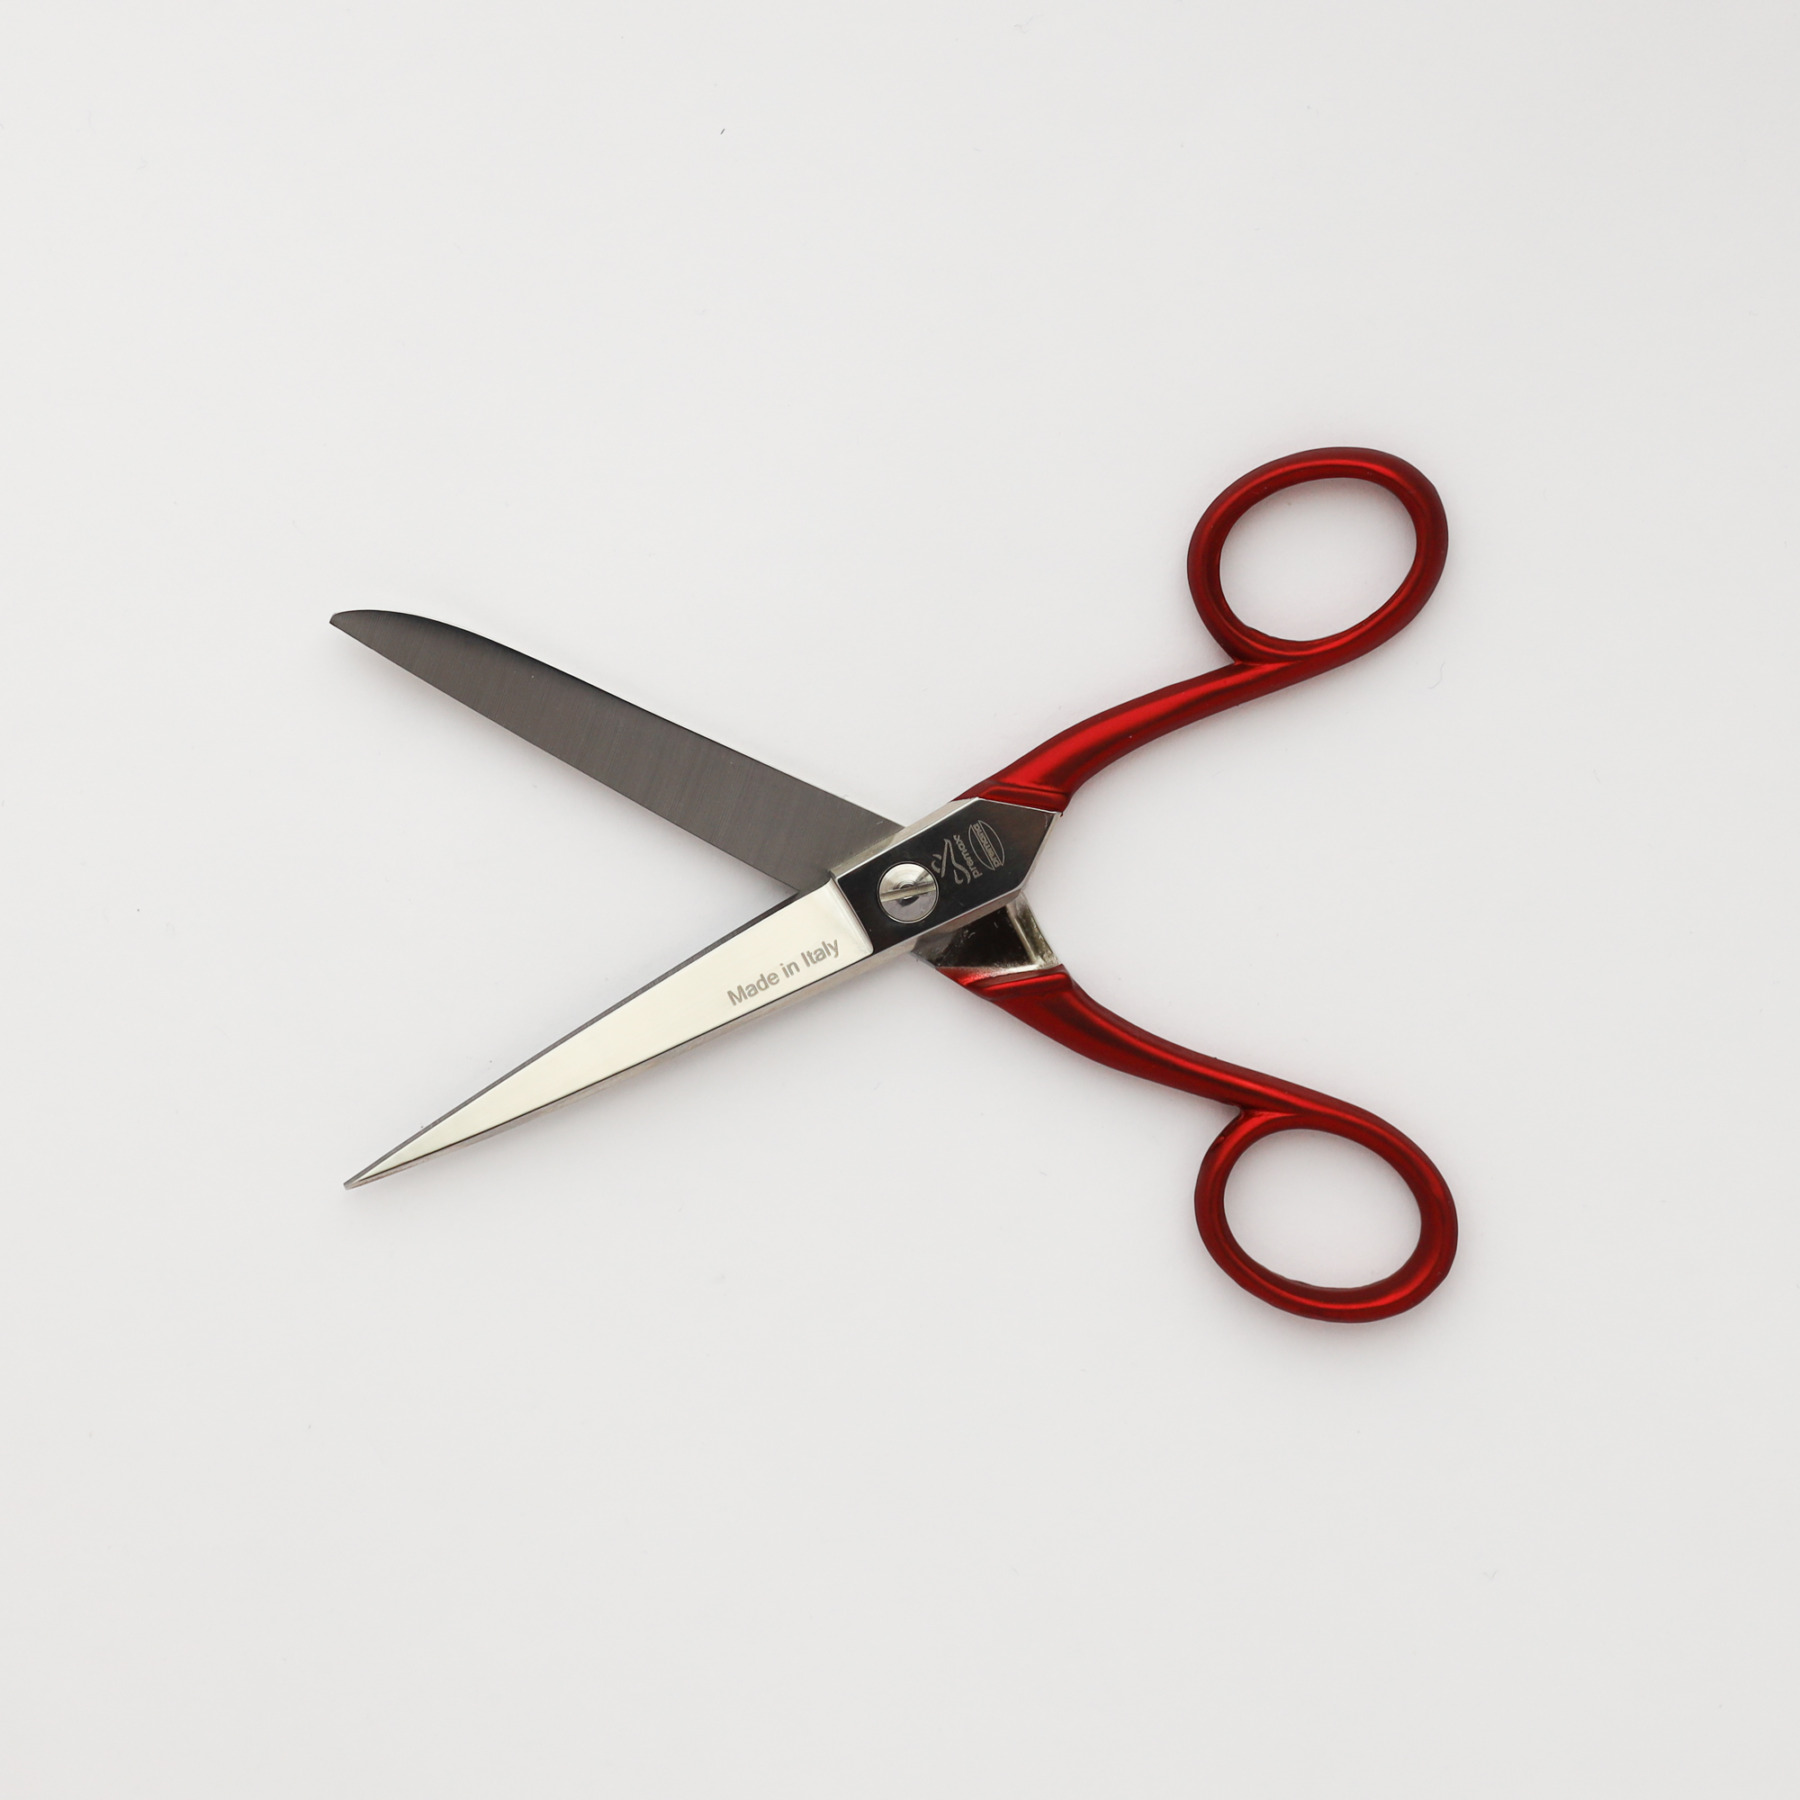 Sewing Scissors - Soft Touch (15cm)